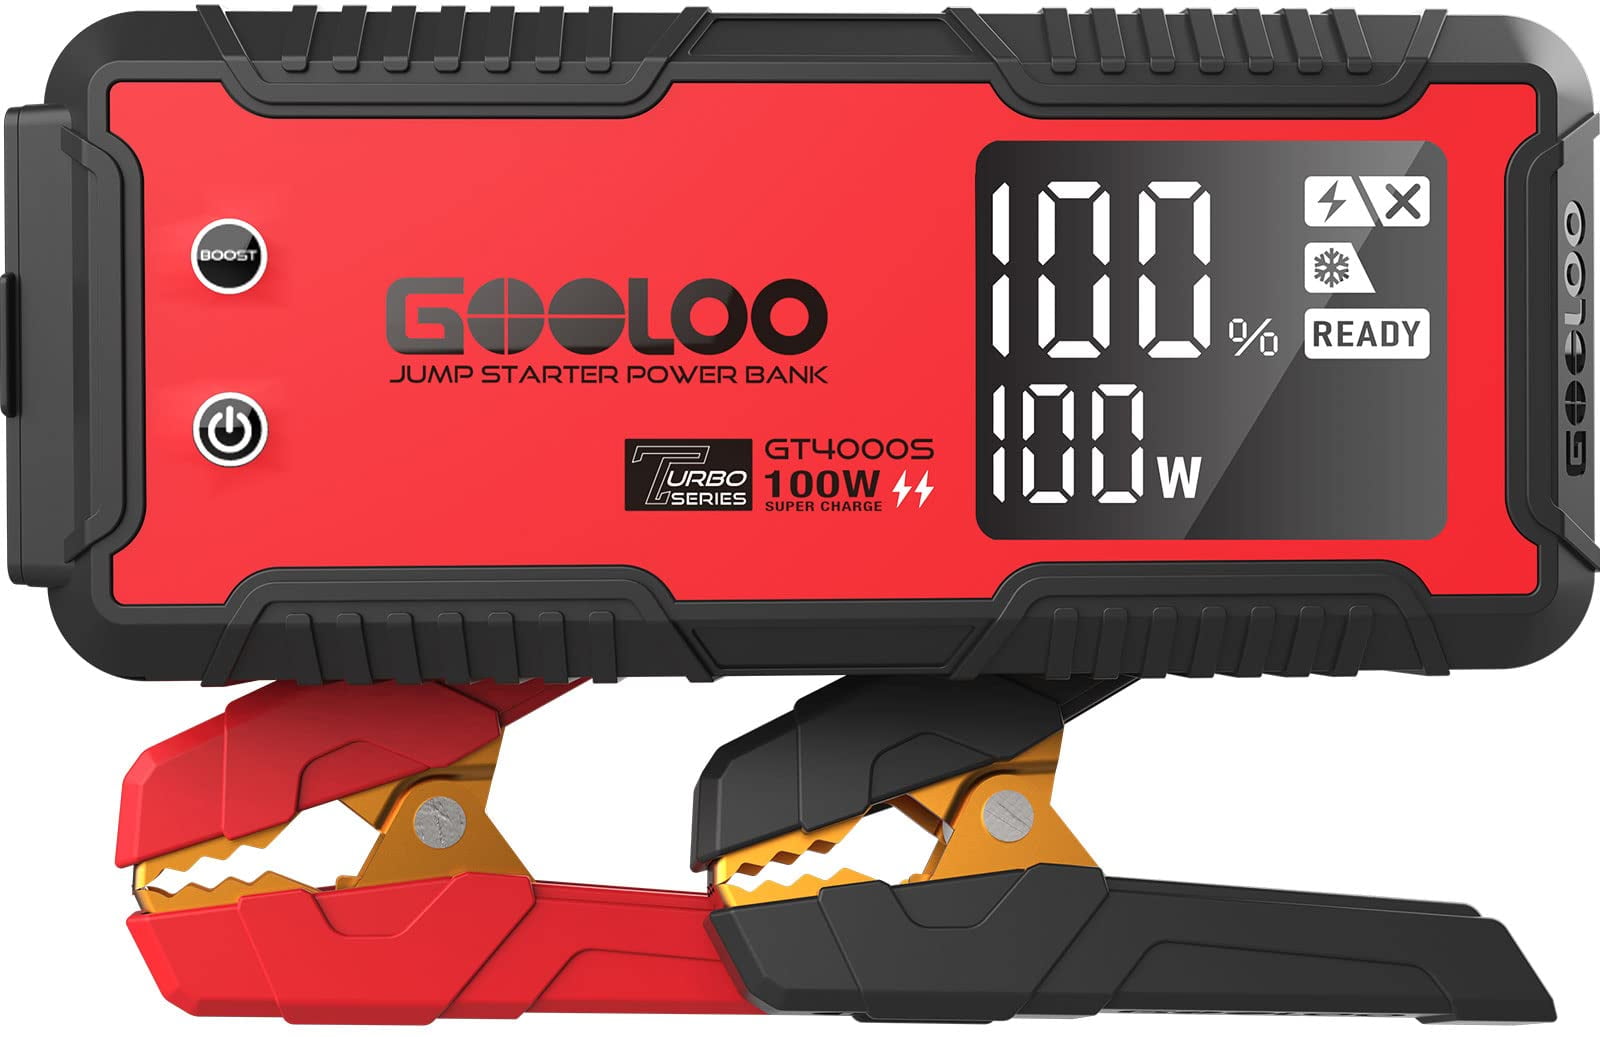 Jump-Starting a Car Has Never Been Easier with GOOLOO - Digital Journal